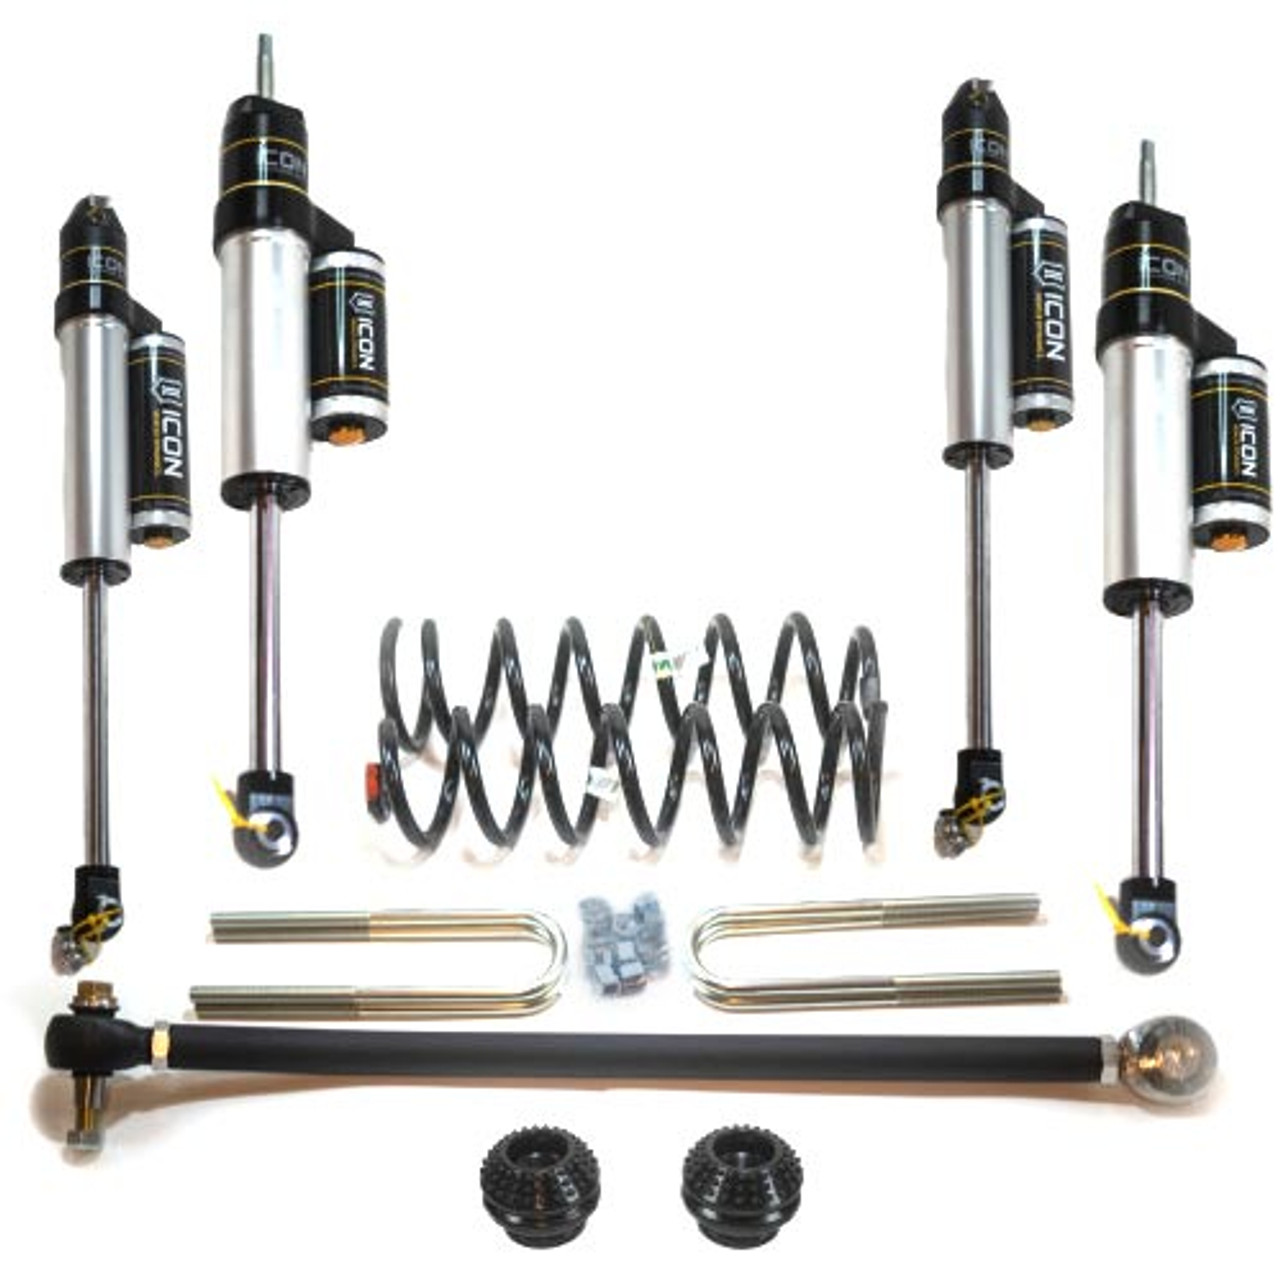 NO LIMIT FABRICATION REVERSE LEVEL KIT WITH 2.5" SHOCKS 2017-2021 FORD F-250/350 4WD (14-BOLT/4" AXLE) (NLFNLRLK174025)Kit View